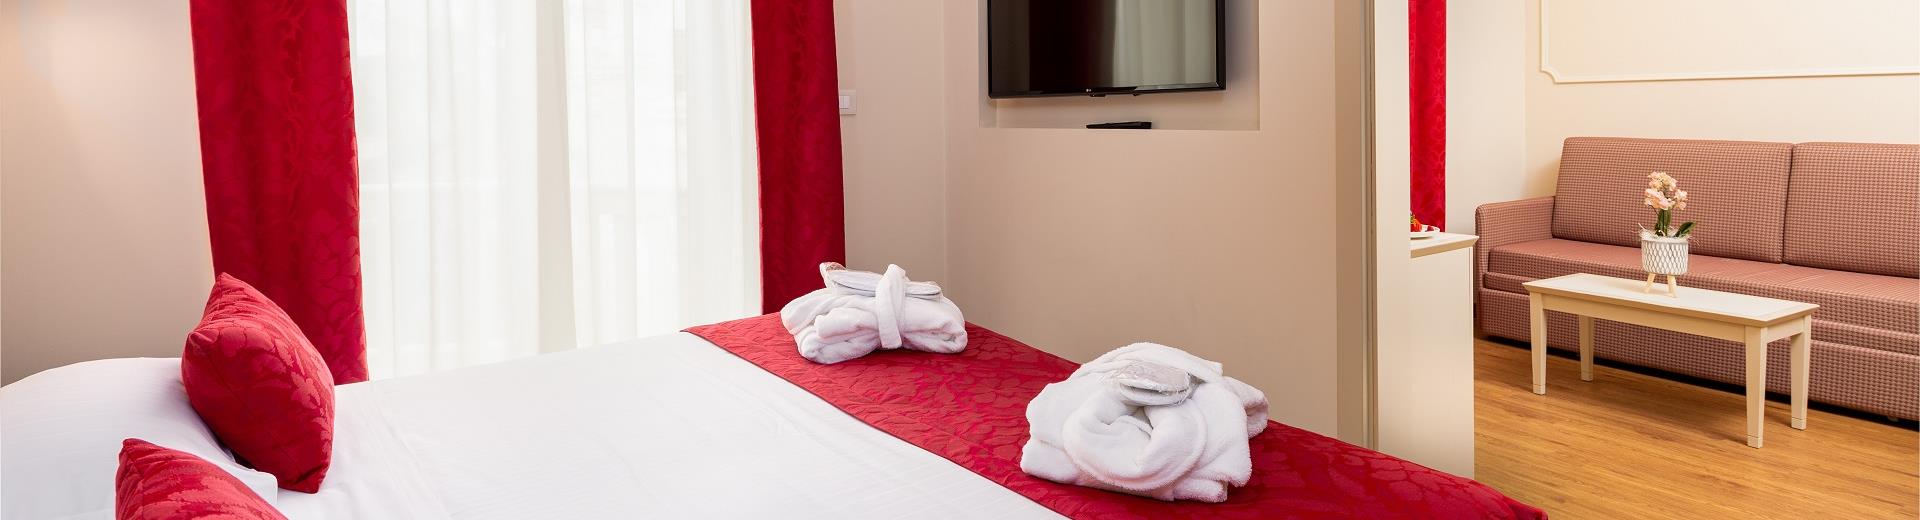 Convenience and services in the rooms of the BW Hotel Nazionale in Sanremo